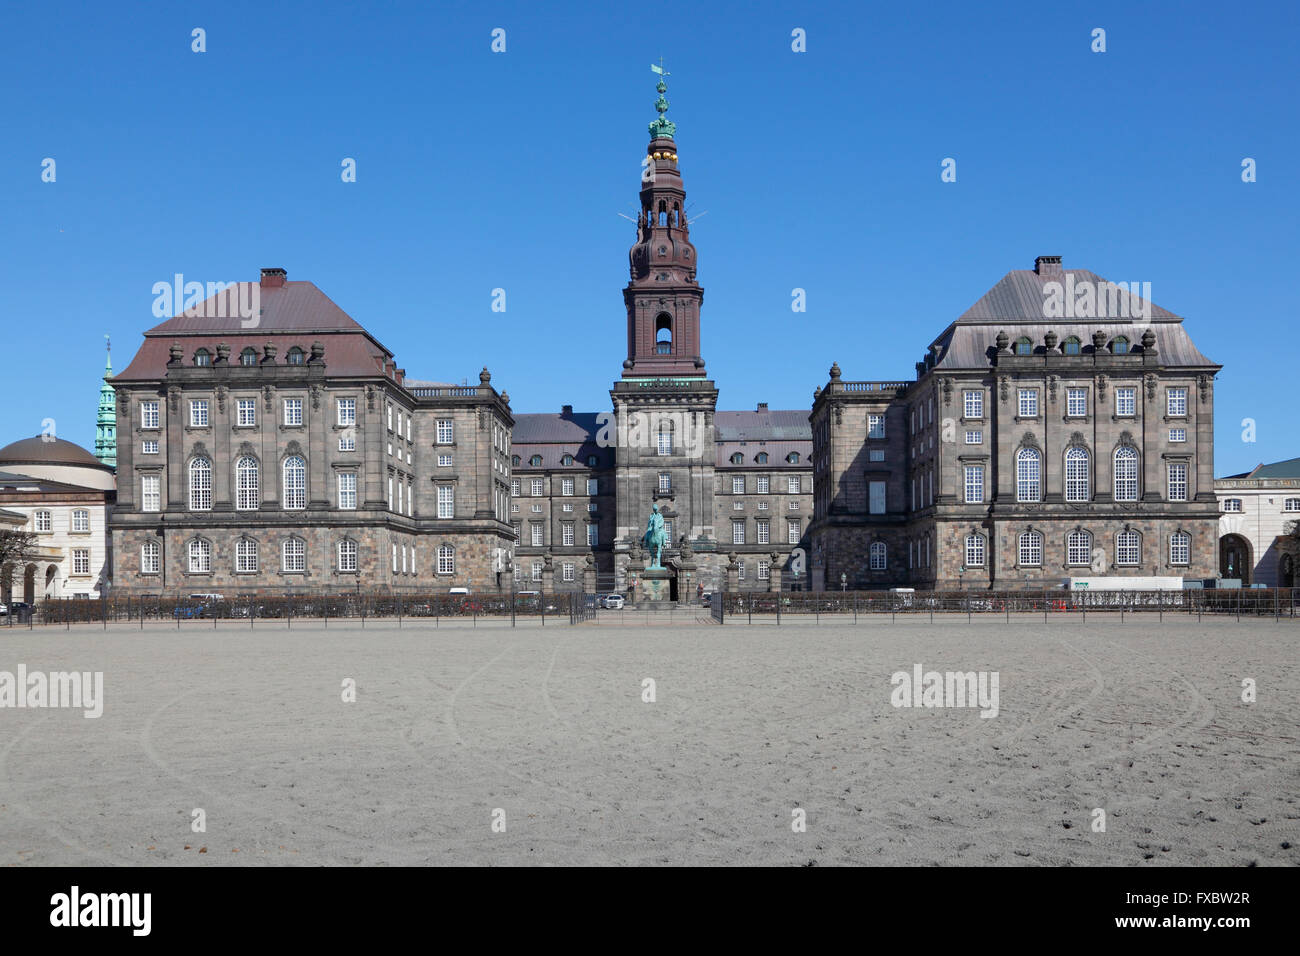 Christiansborg Palace - The Danish Parliament building in Copenhagen, Denmark - home of the Folketinget, seen from the courtyard Stock Photo